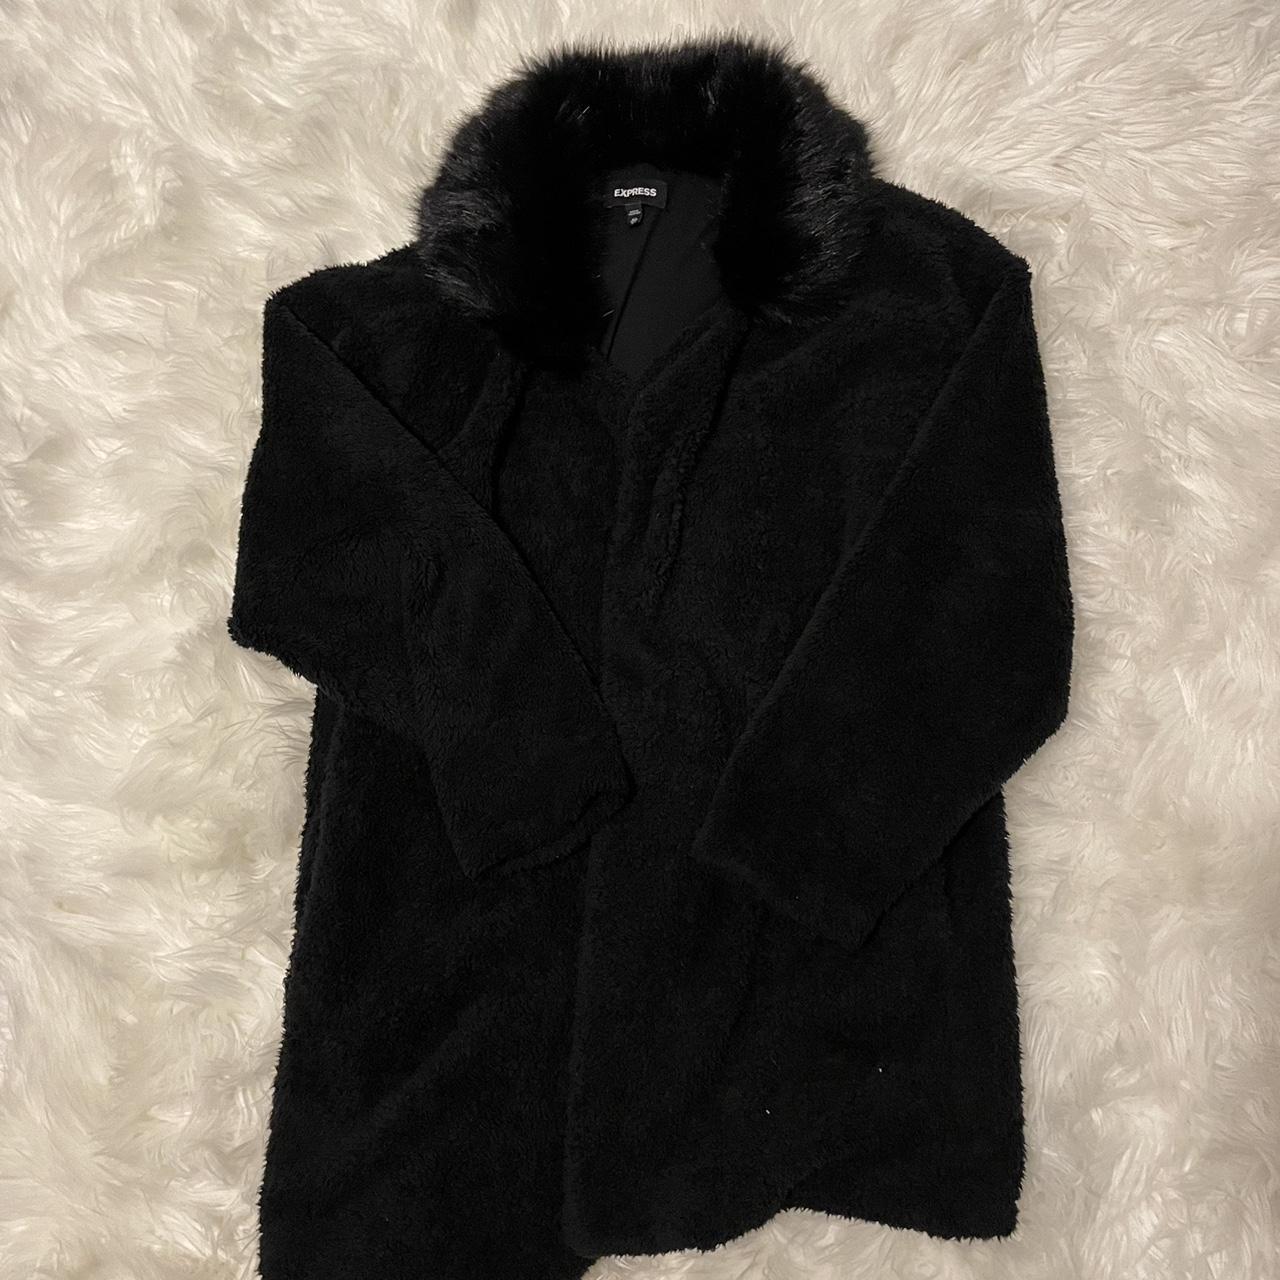 black fuzzy coat with faux fur collar great... - Depop